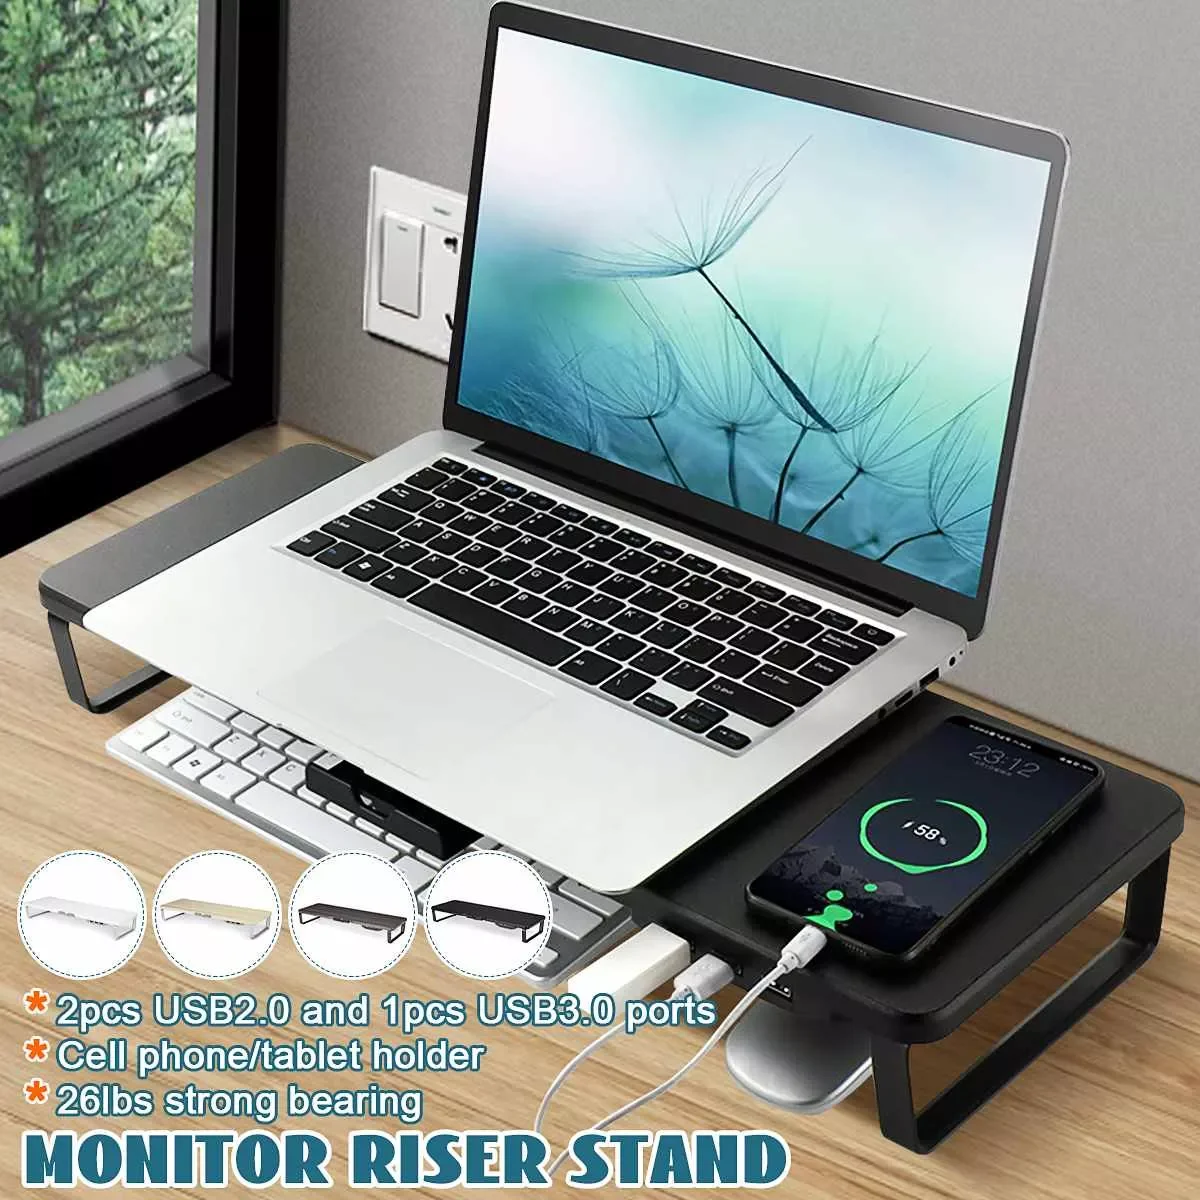 Monitor PC Laptop Stand Monitor Riser 3 USB Charging Desk Phone Holder Computer Desk Support Monitor Holder for Home Office